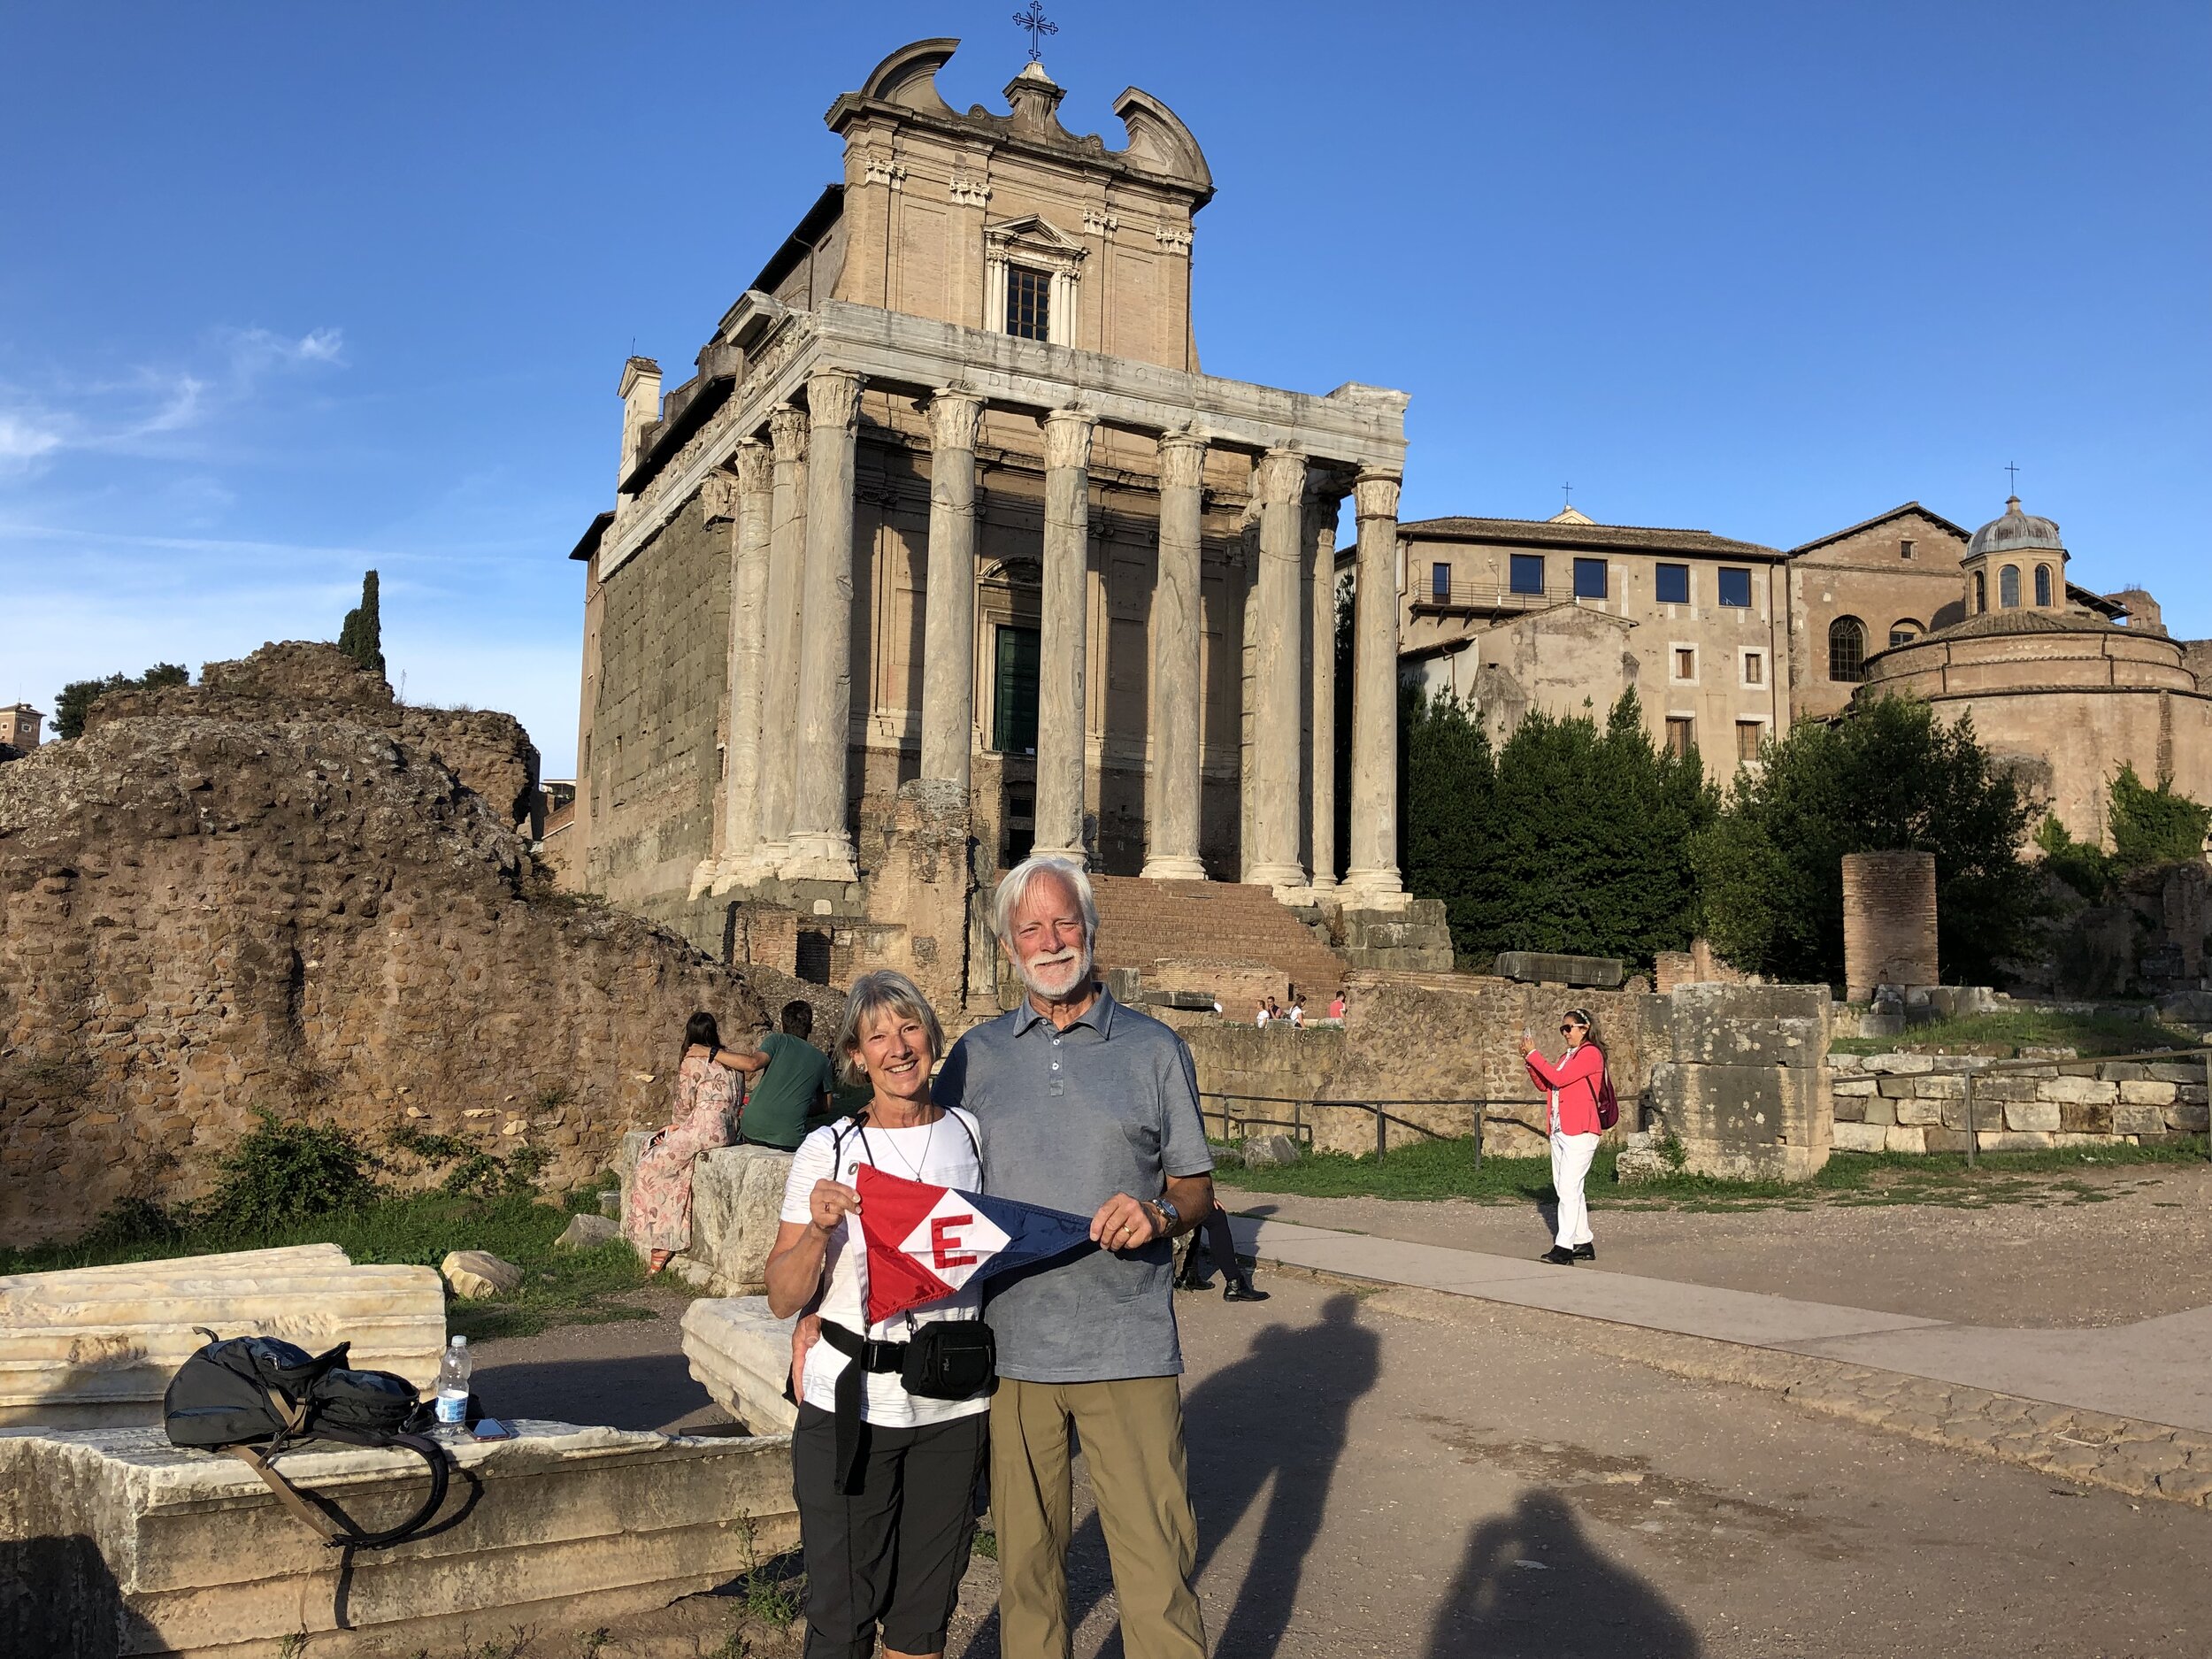  Chris &amp; Ken hoist the colors in front of the Forum in Rome, Italy 